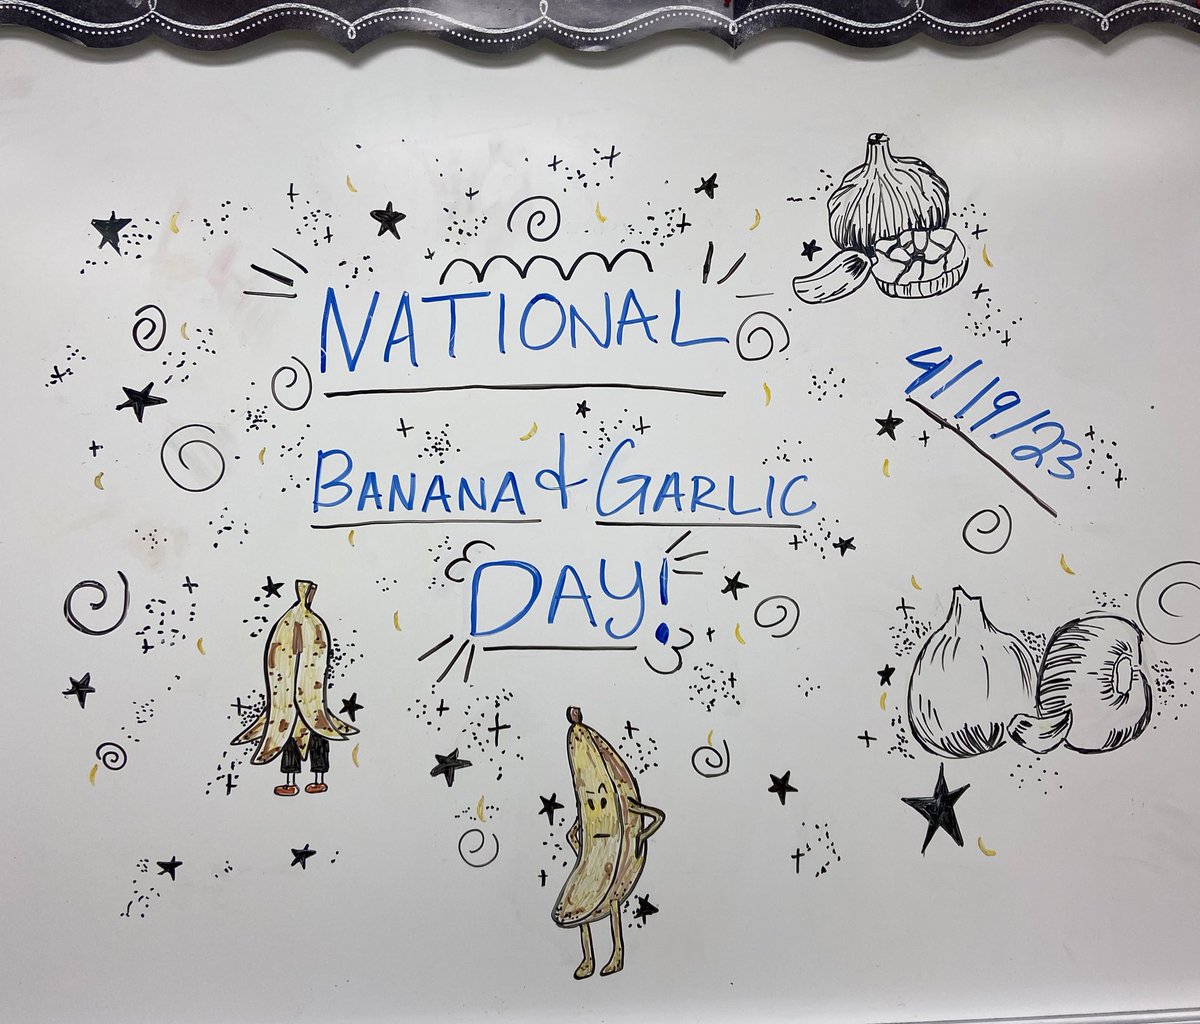 Every day my talented 7th period students update the board with special nqtional day updates! Cheers to Claire, Libby, and other 7th period contributors! 🎨 #NationalBananaDay #NationalGarlicDay